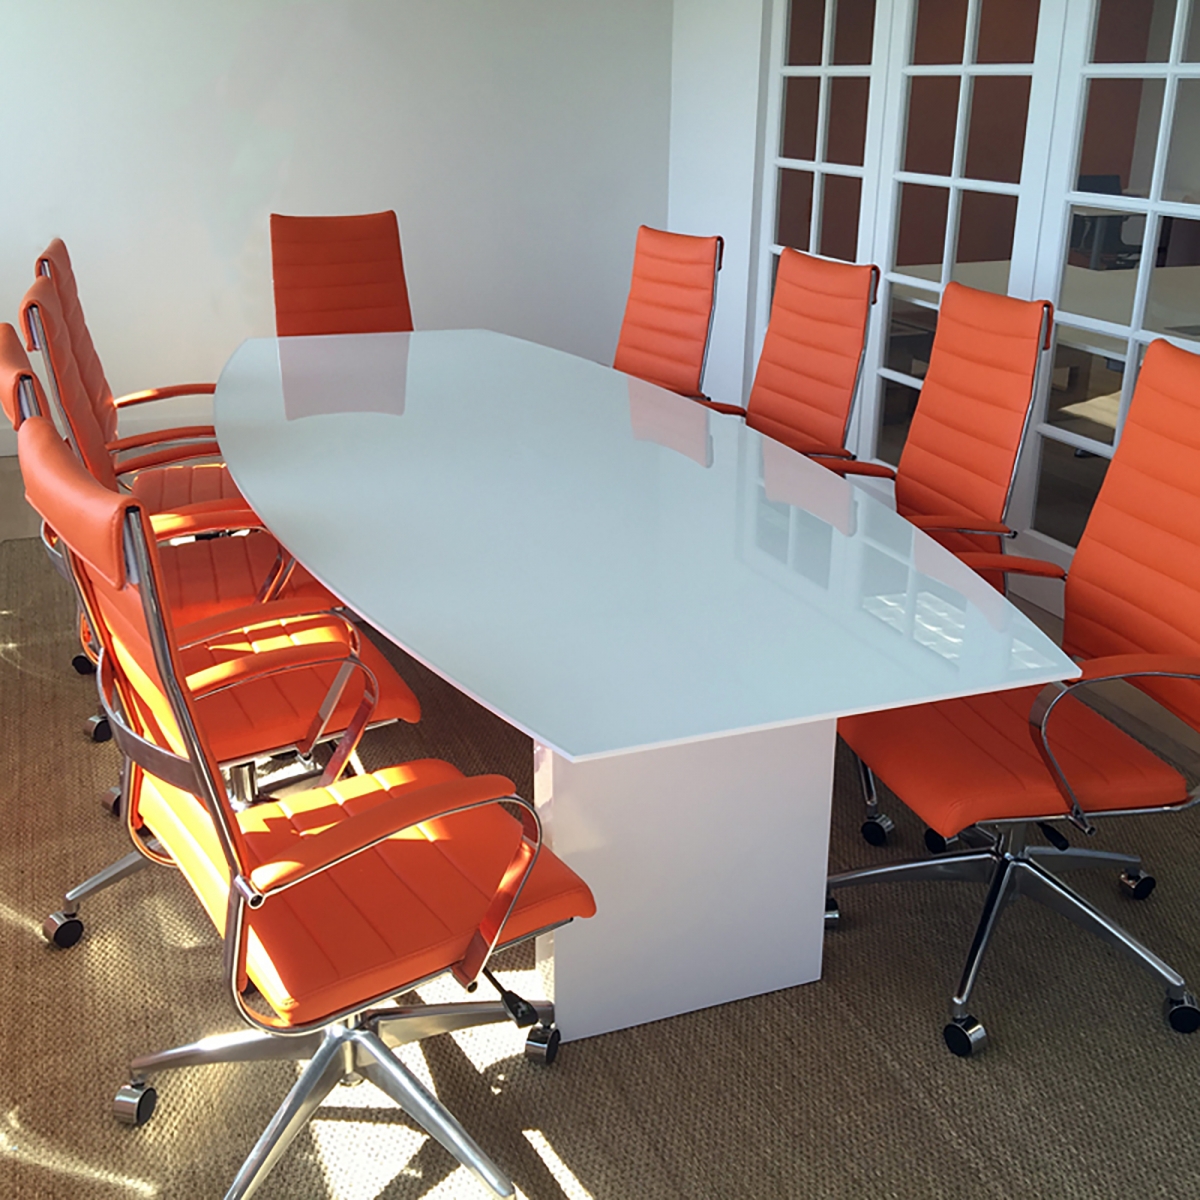 Axis Boat Shape Conference Table With Glass Top